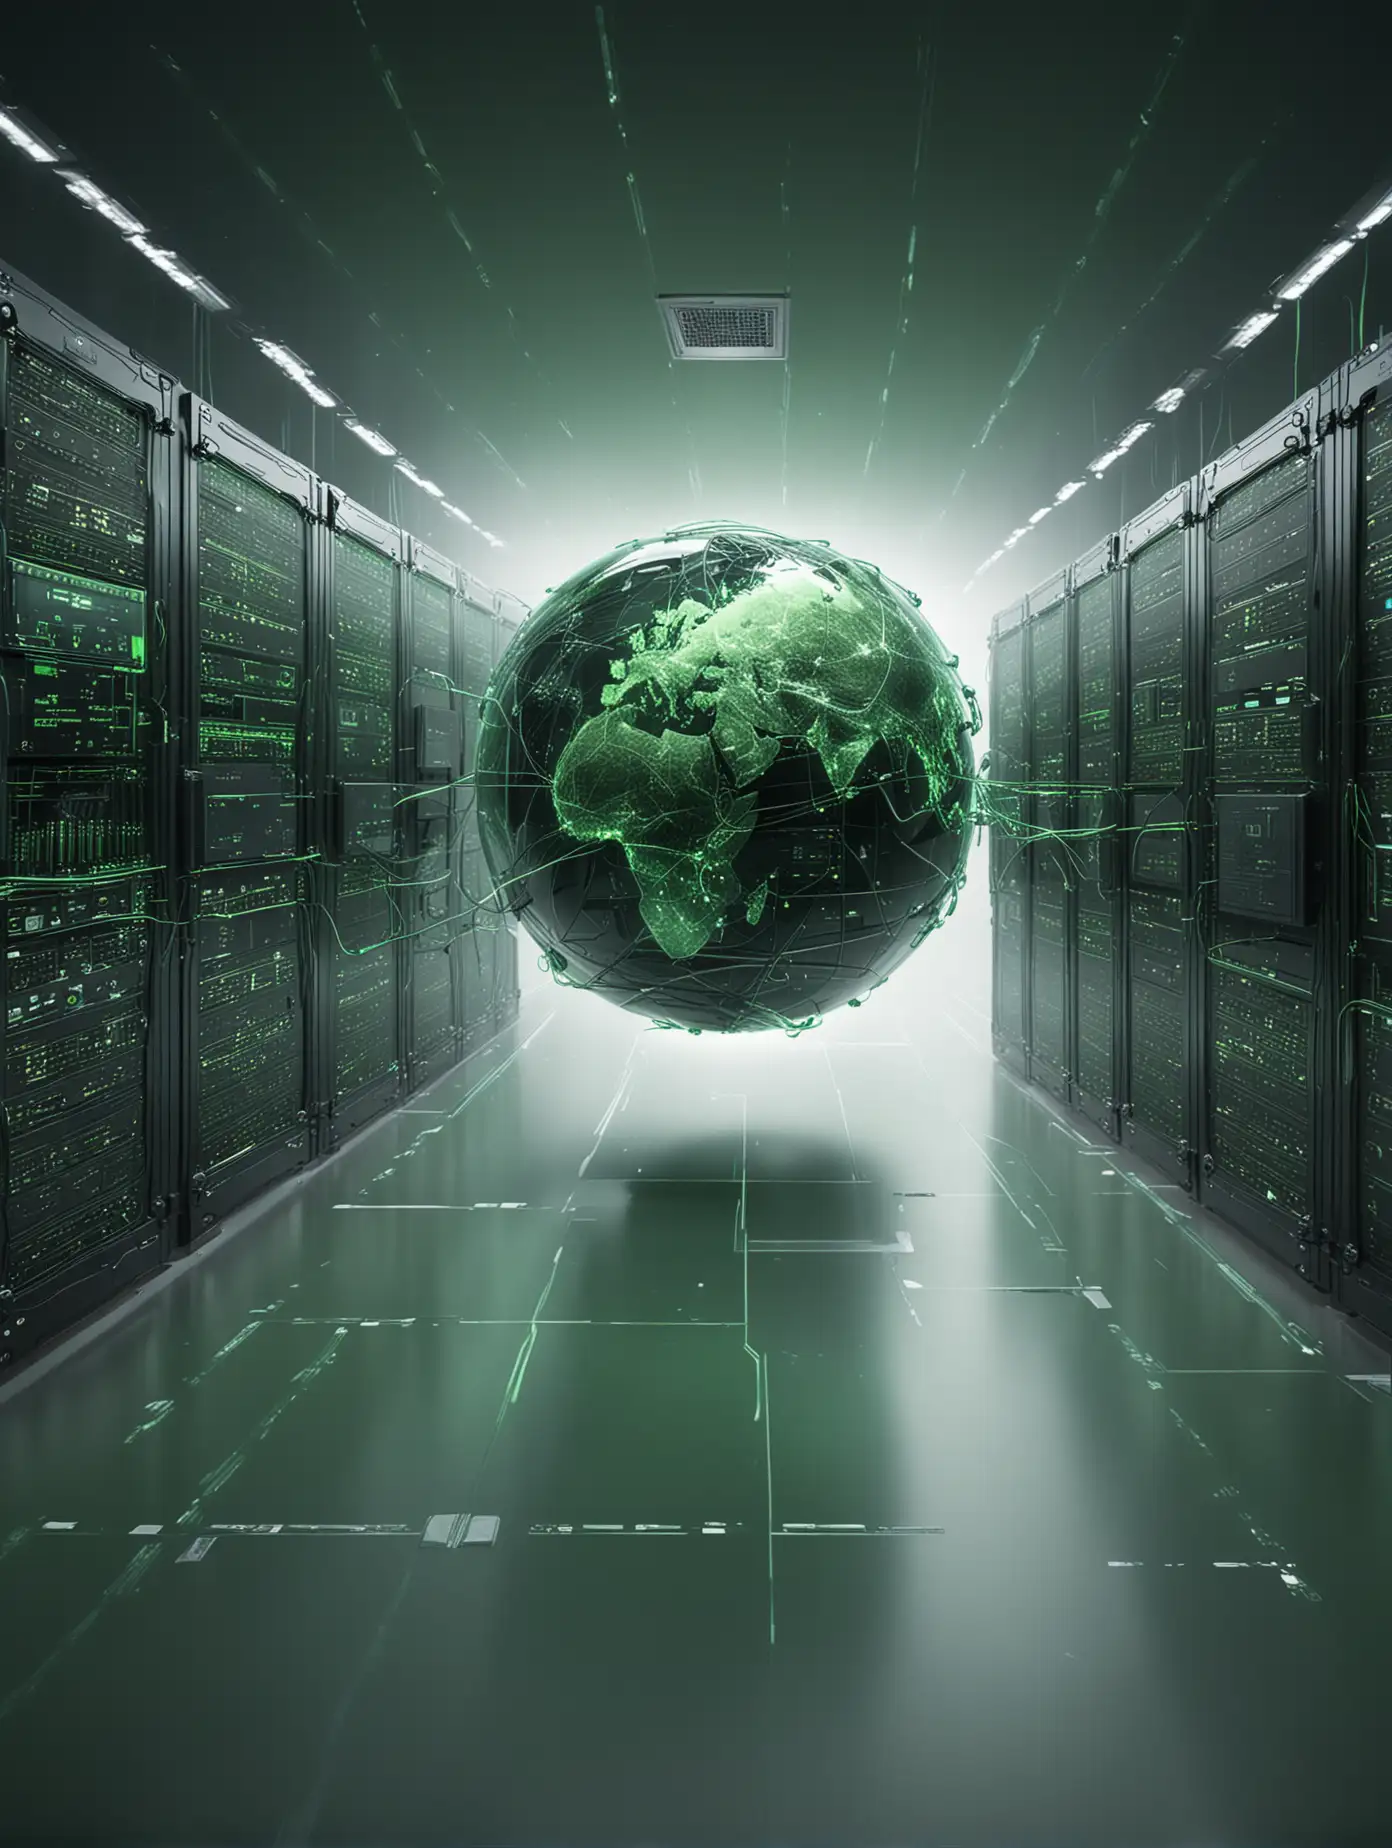 Artistic impression of a utopic green world connected with supercomputers 